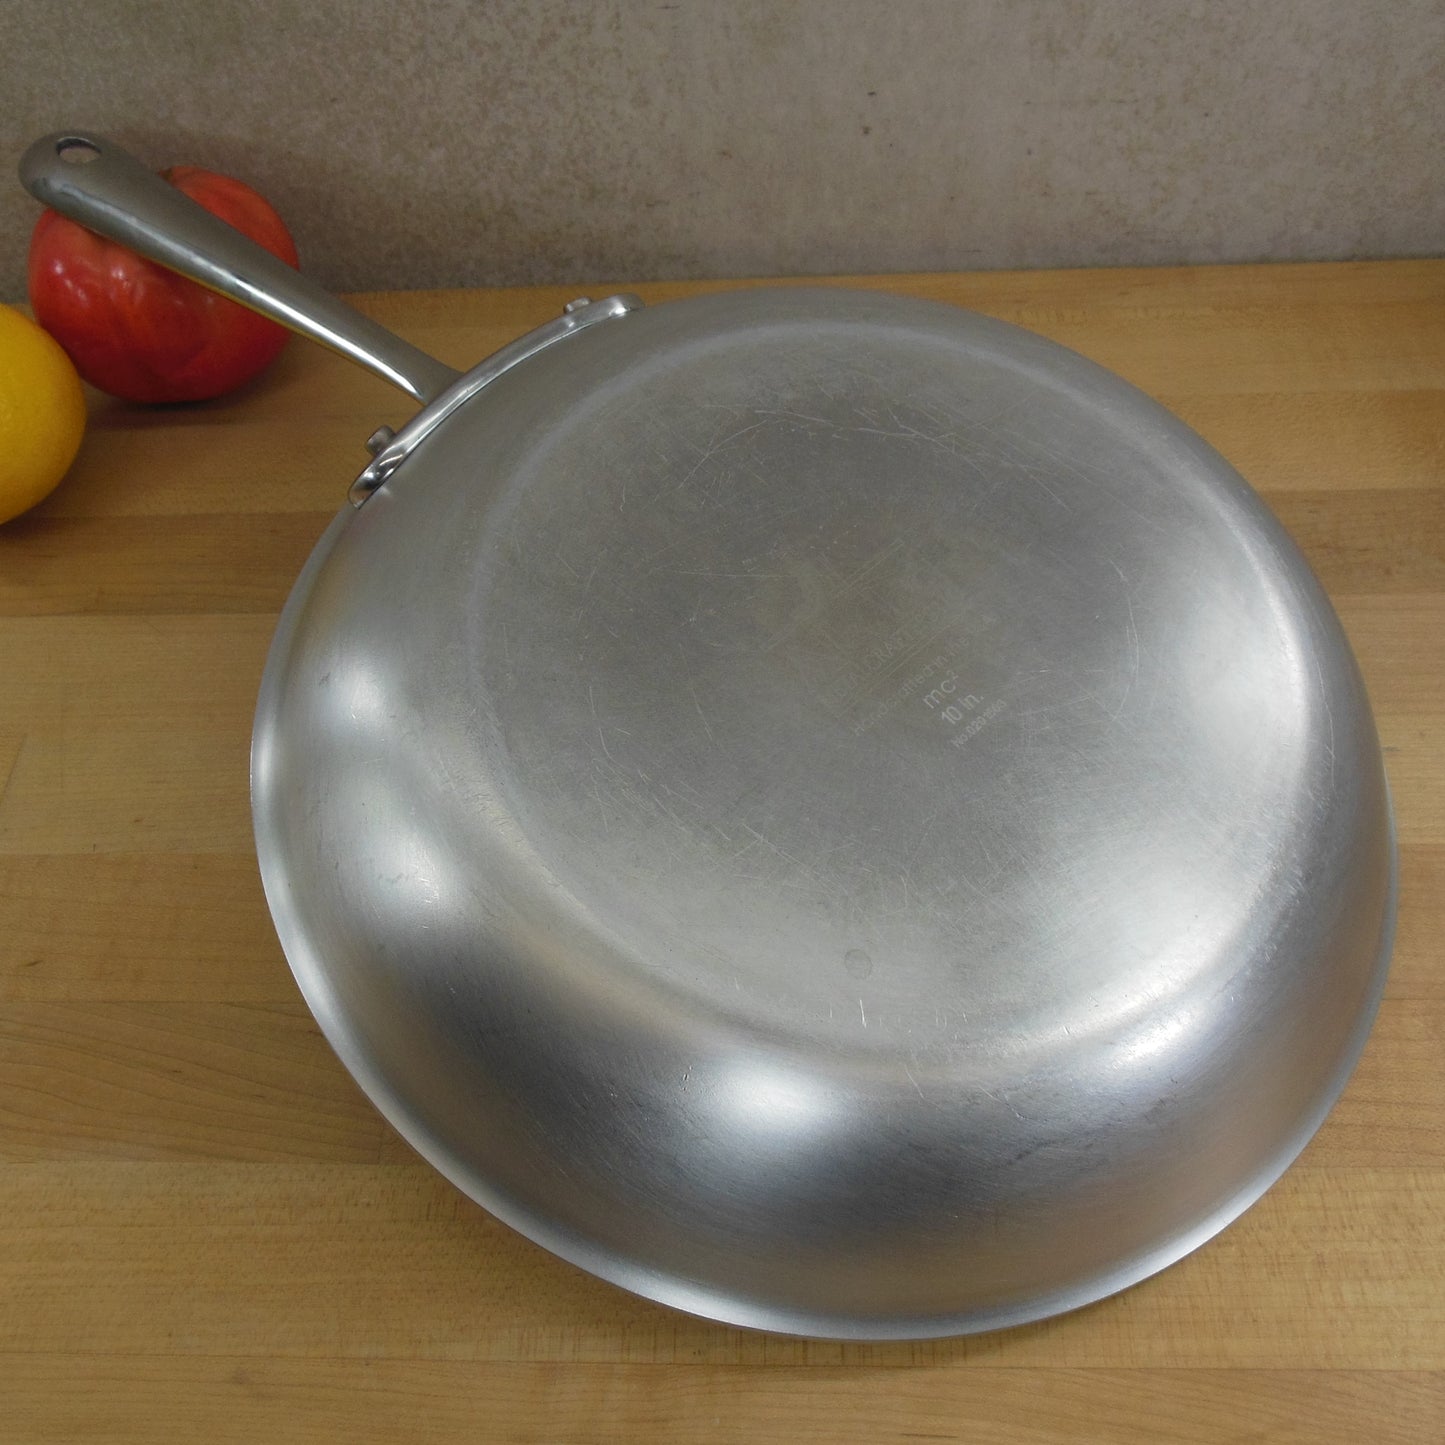 All-Clad USA Metal Crafters MC2 10" Fry Pan Skillet Bottom